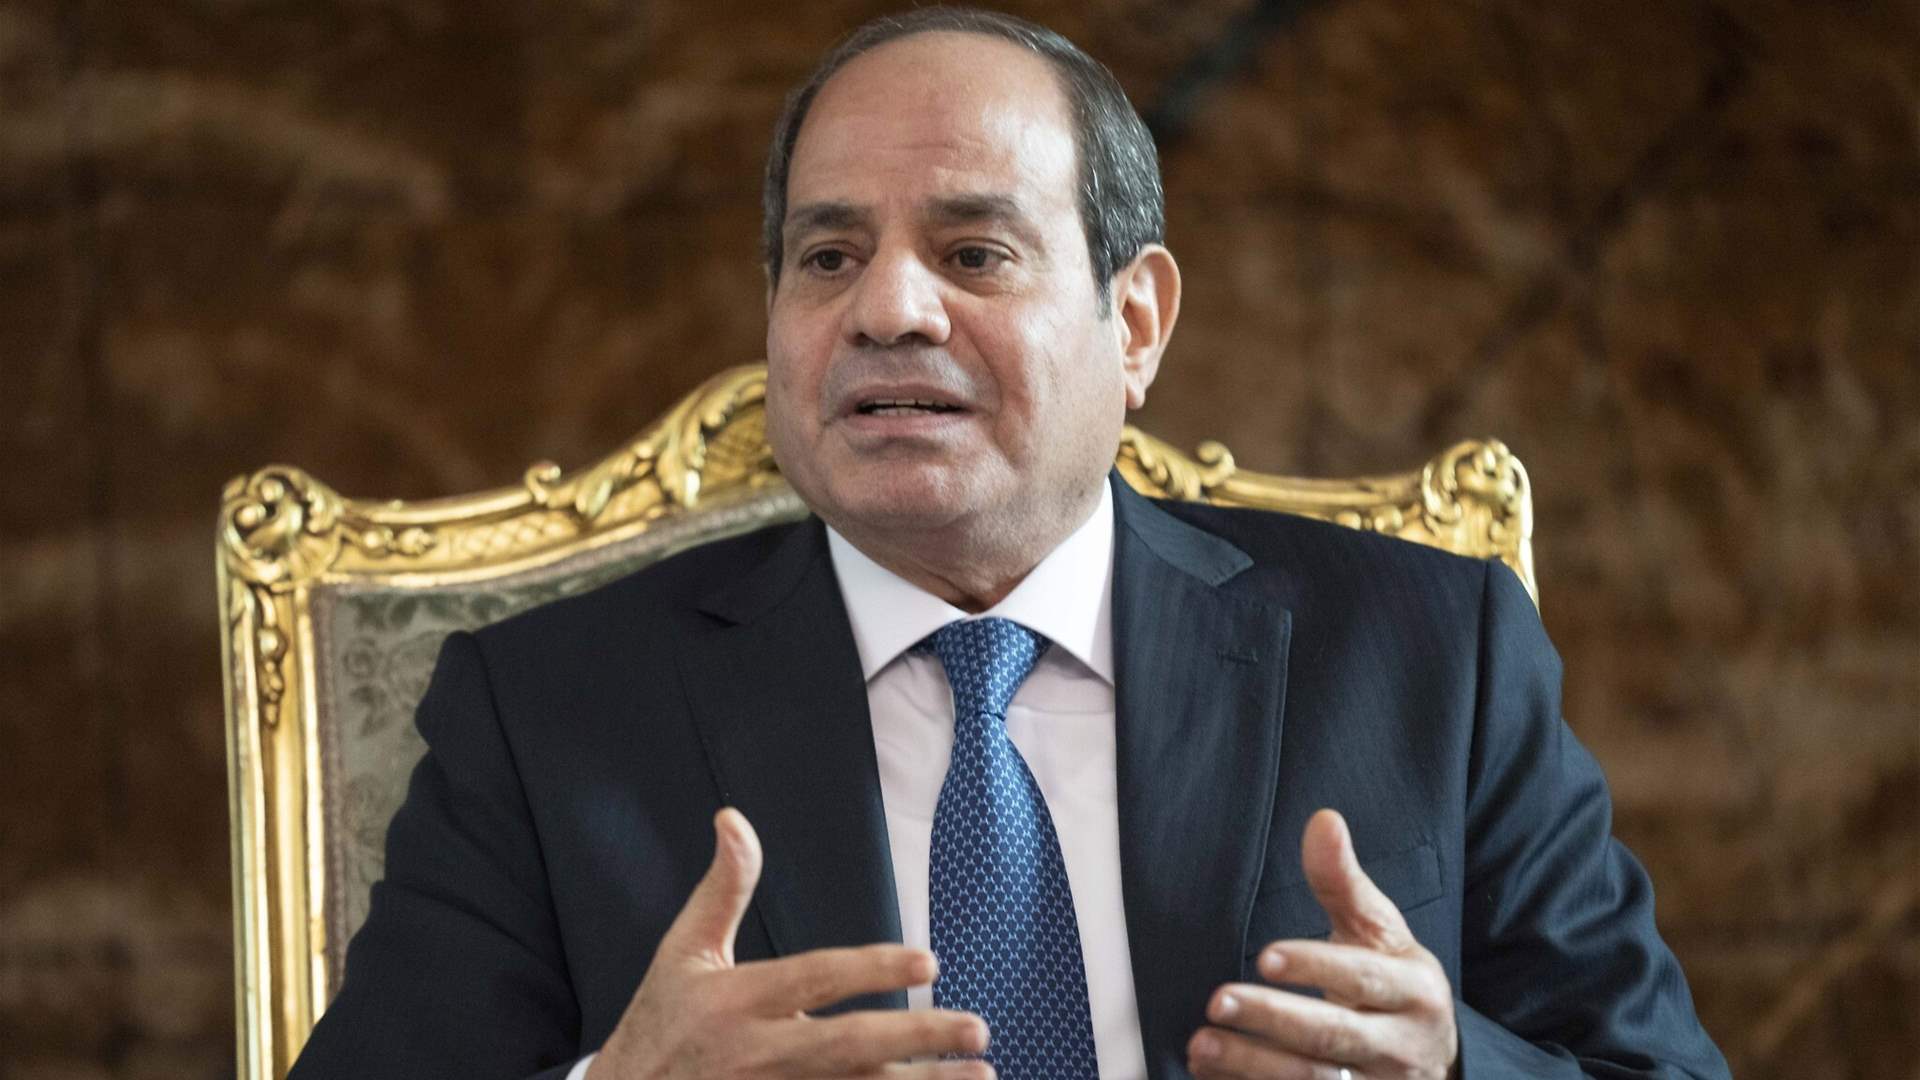 El-Sisi to take oath for new term amid crises in Egypt